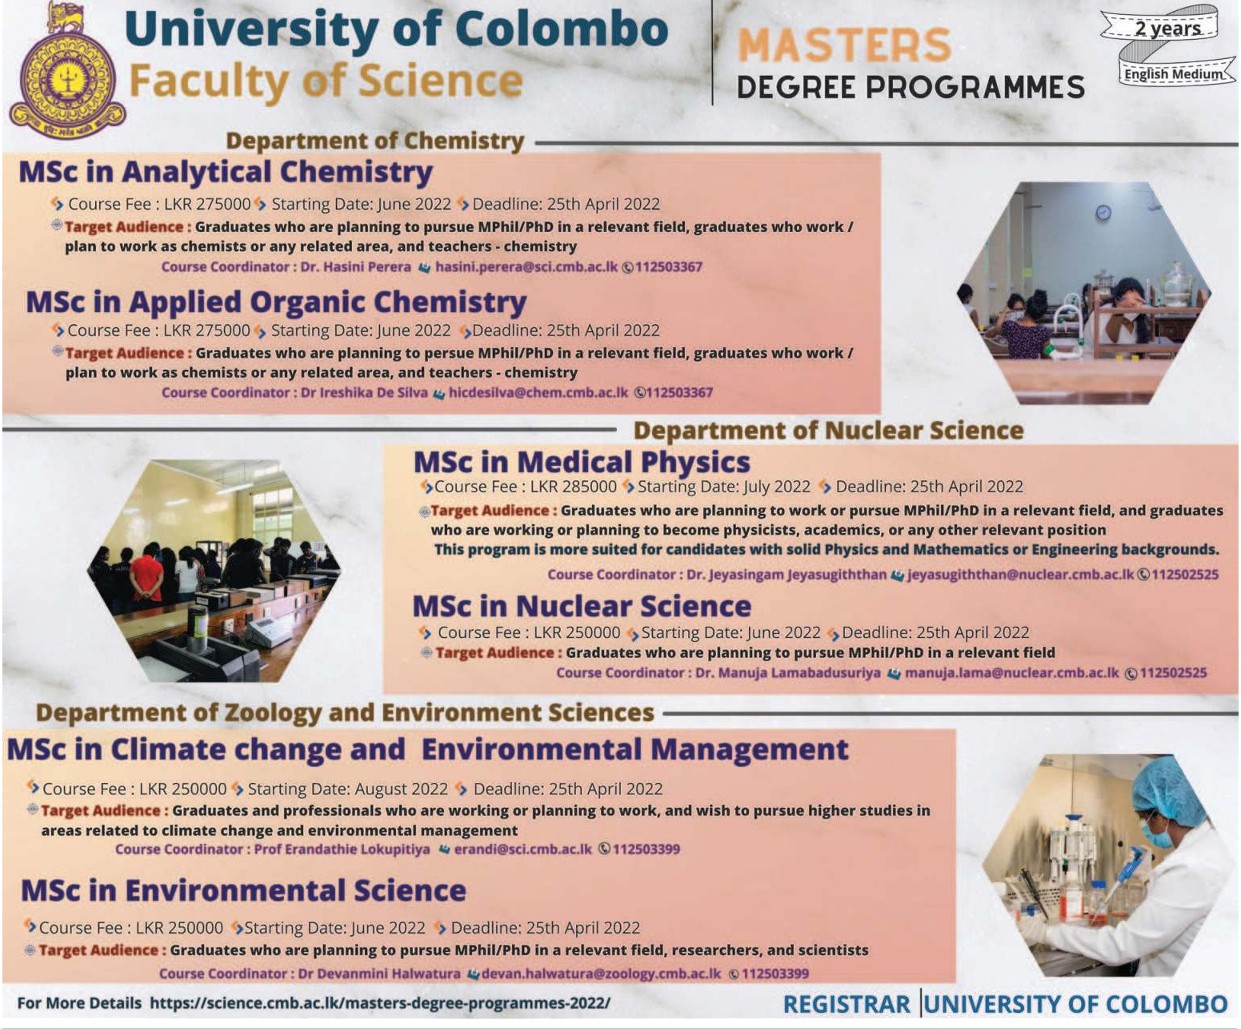 Masters Degree Programmes 2022 Intake - Faculty of Science - University of Colombo